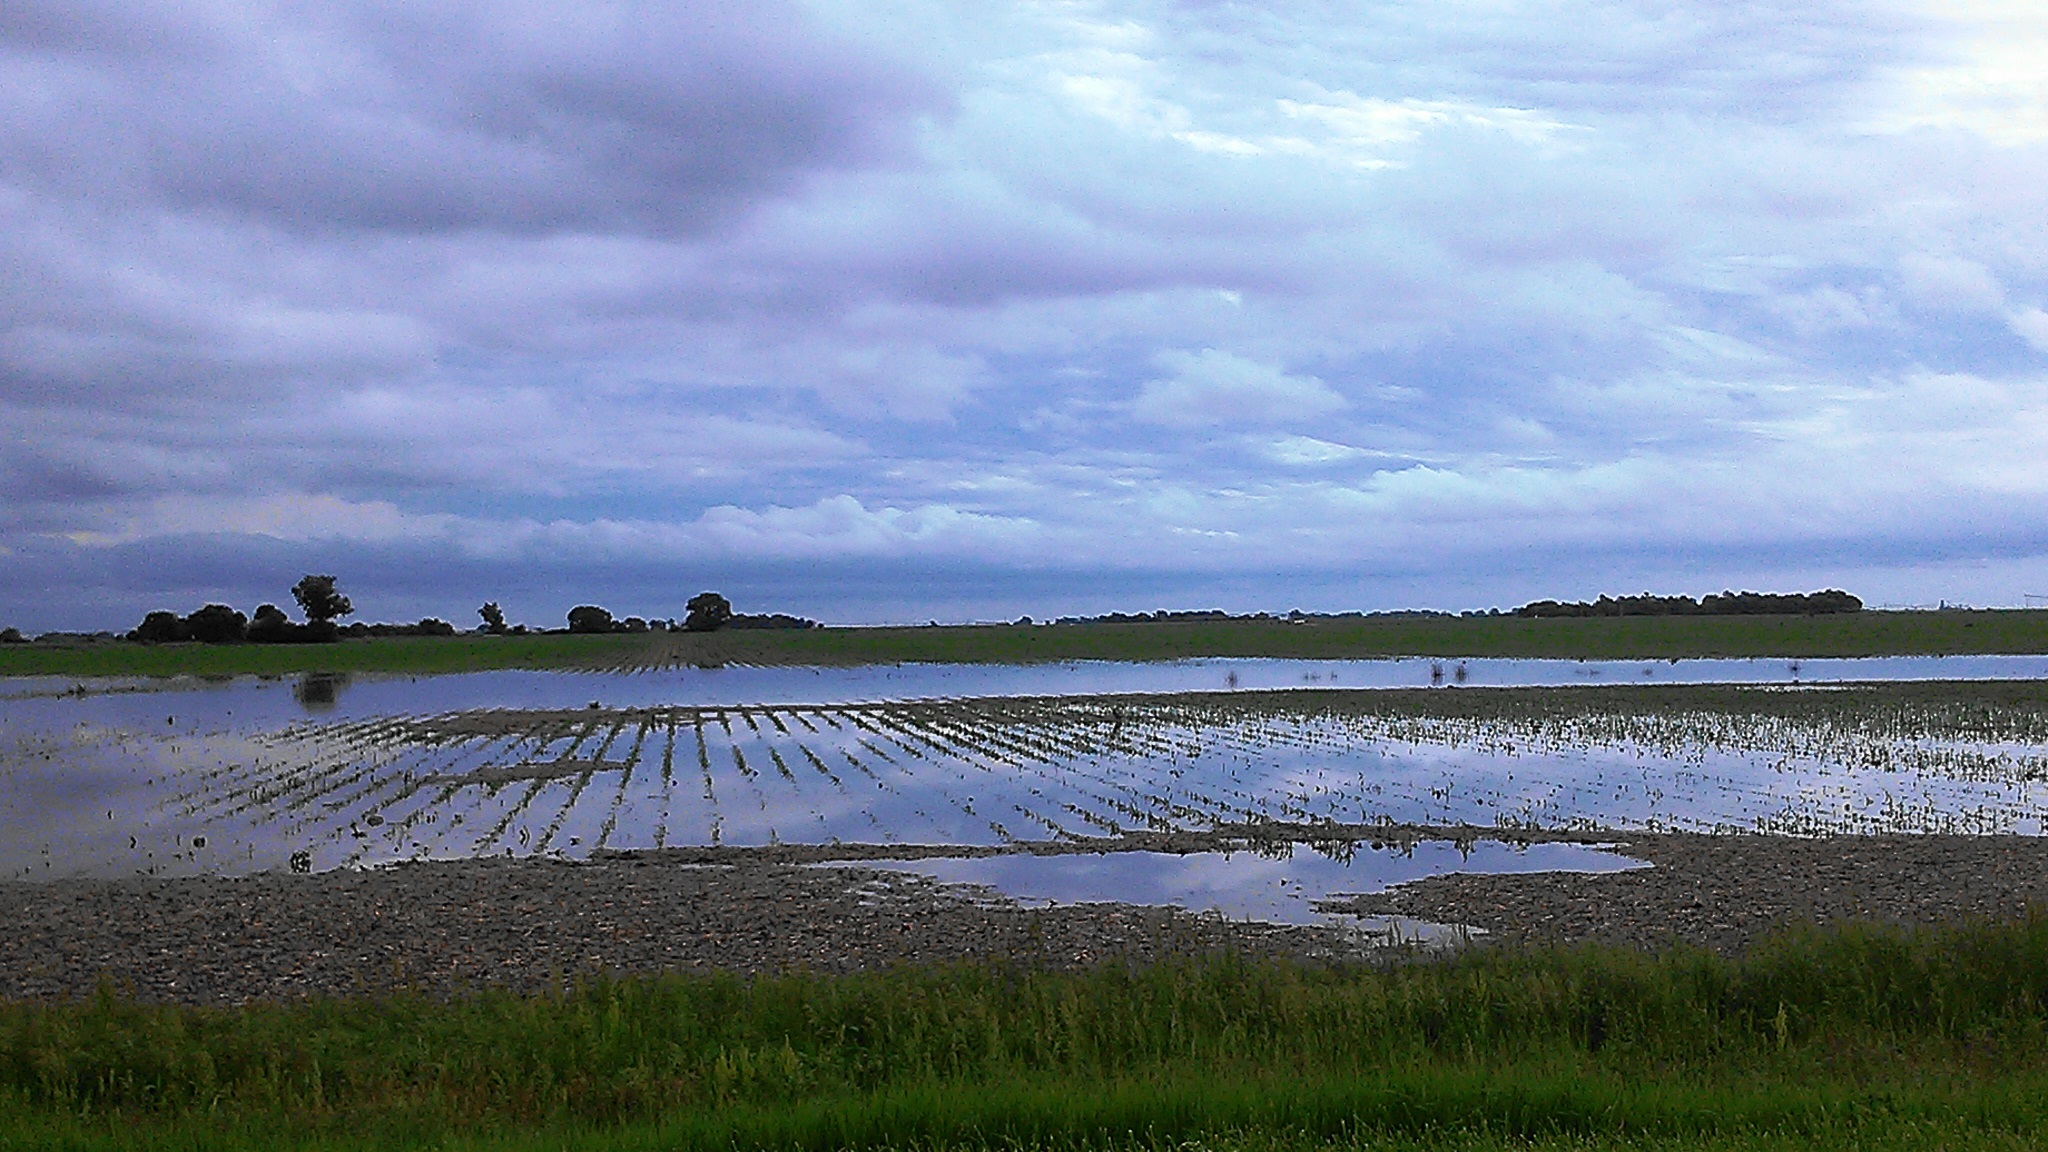 The evening of June 3rd resulted in various rainfall totals throughout the county and hail damage to an estimated 30% of the County.  This photo is of the west fork of the Upper Big Blue River that was flooding many fields along Hwy 6 between Hwy 14 and Sutton.